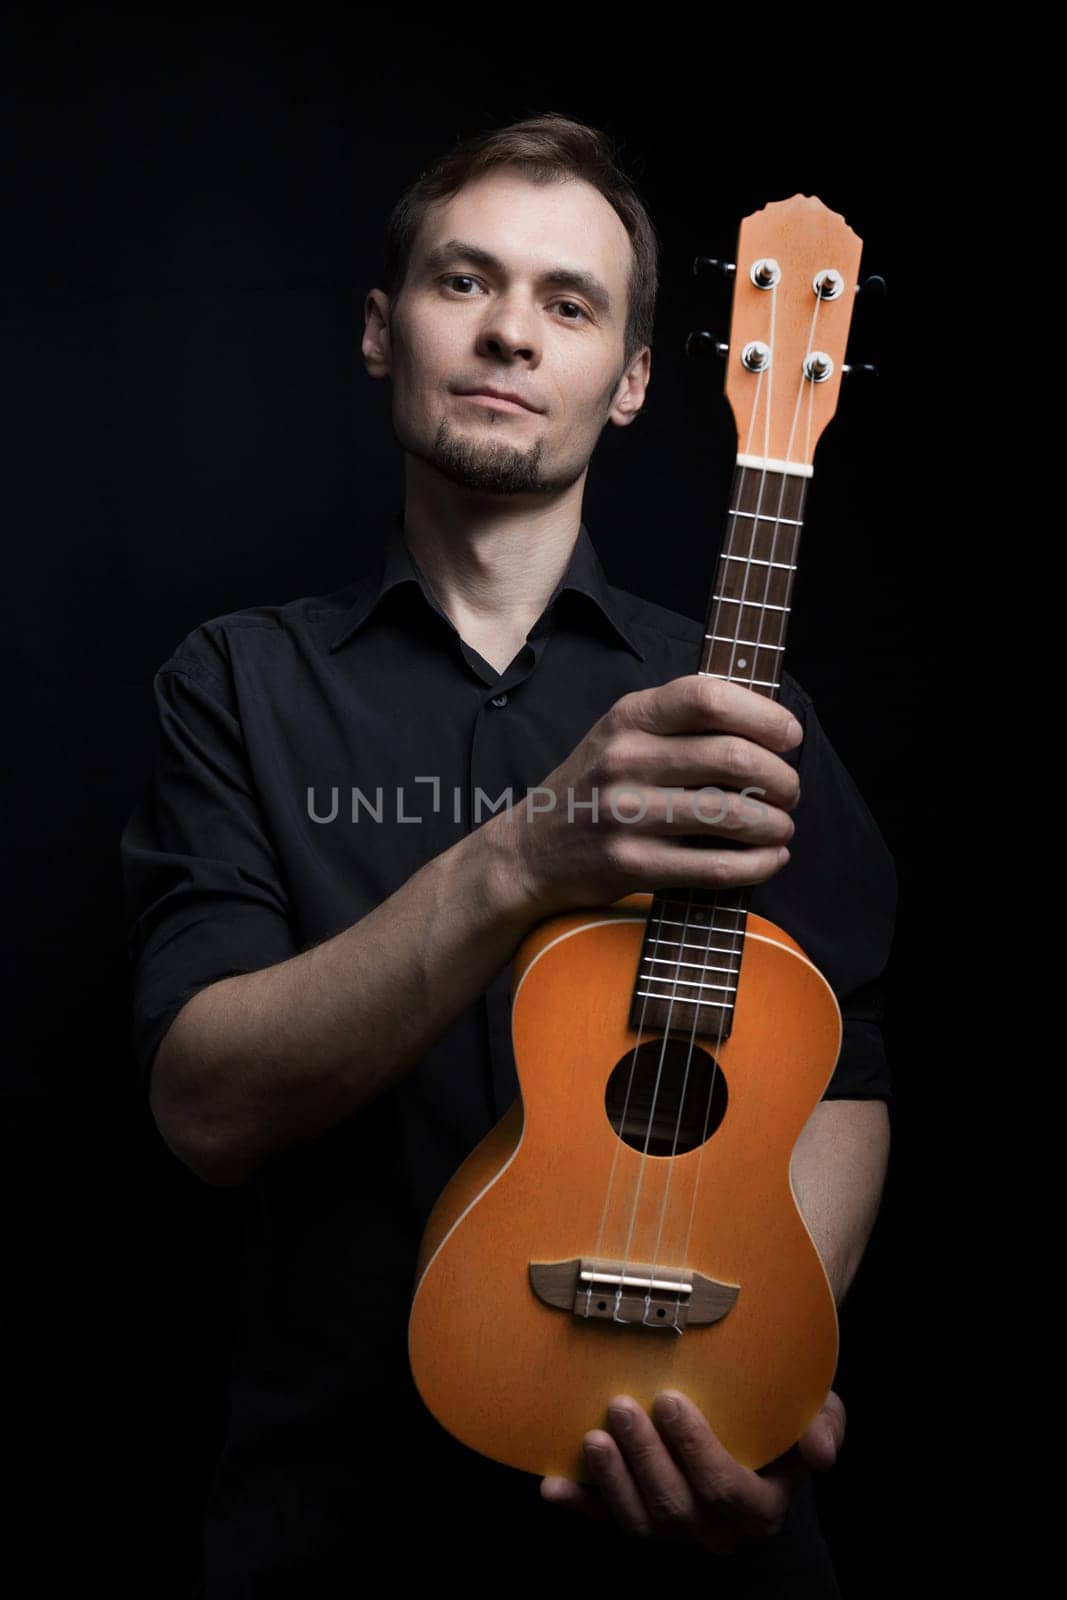 Handsome young low key man portrait with ukulele guitar over black background.